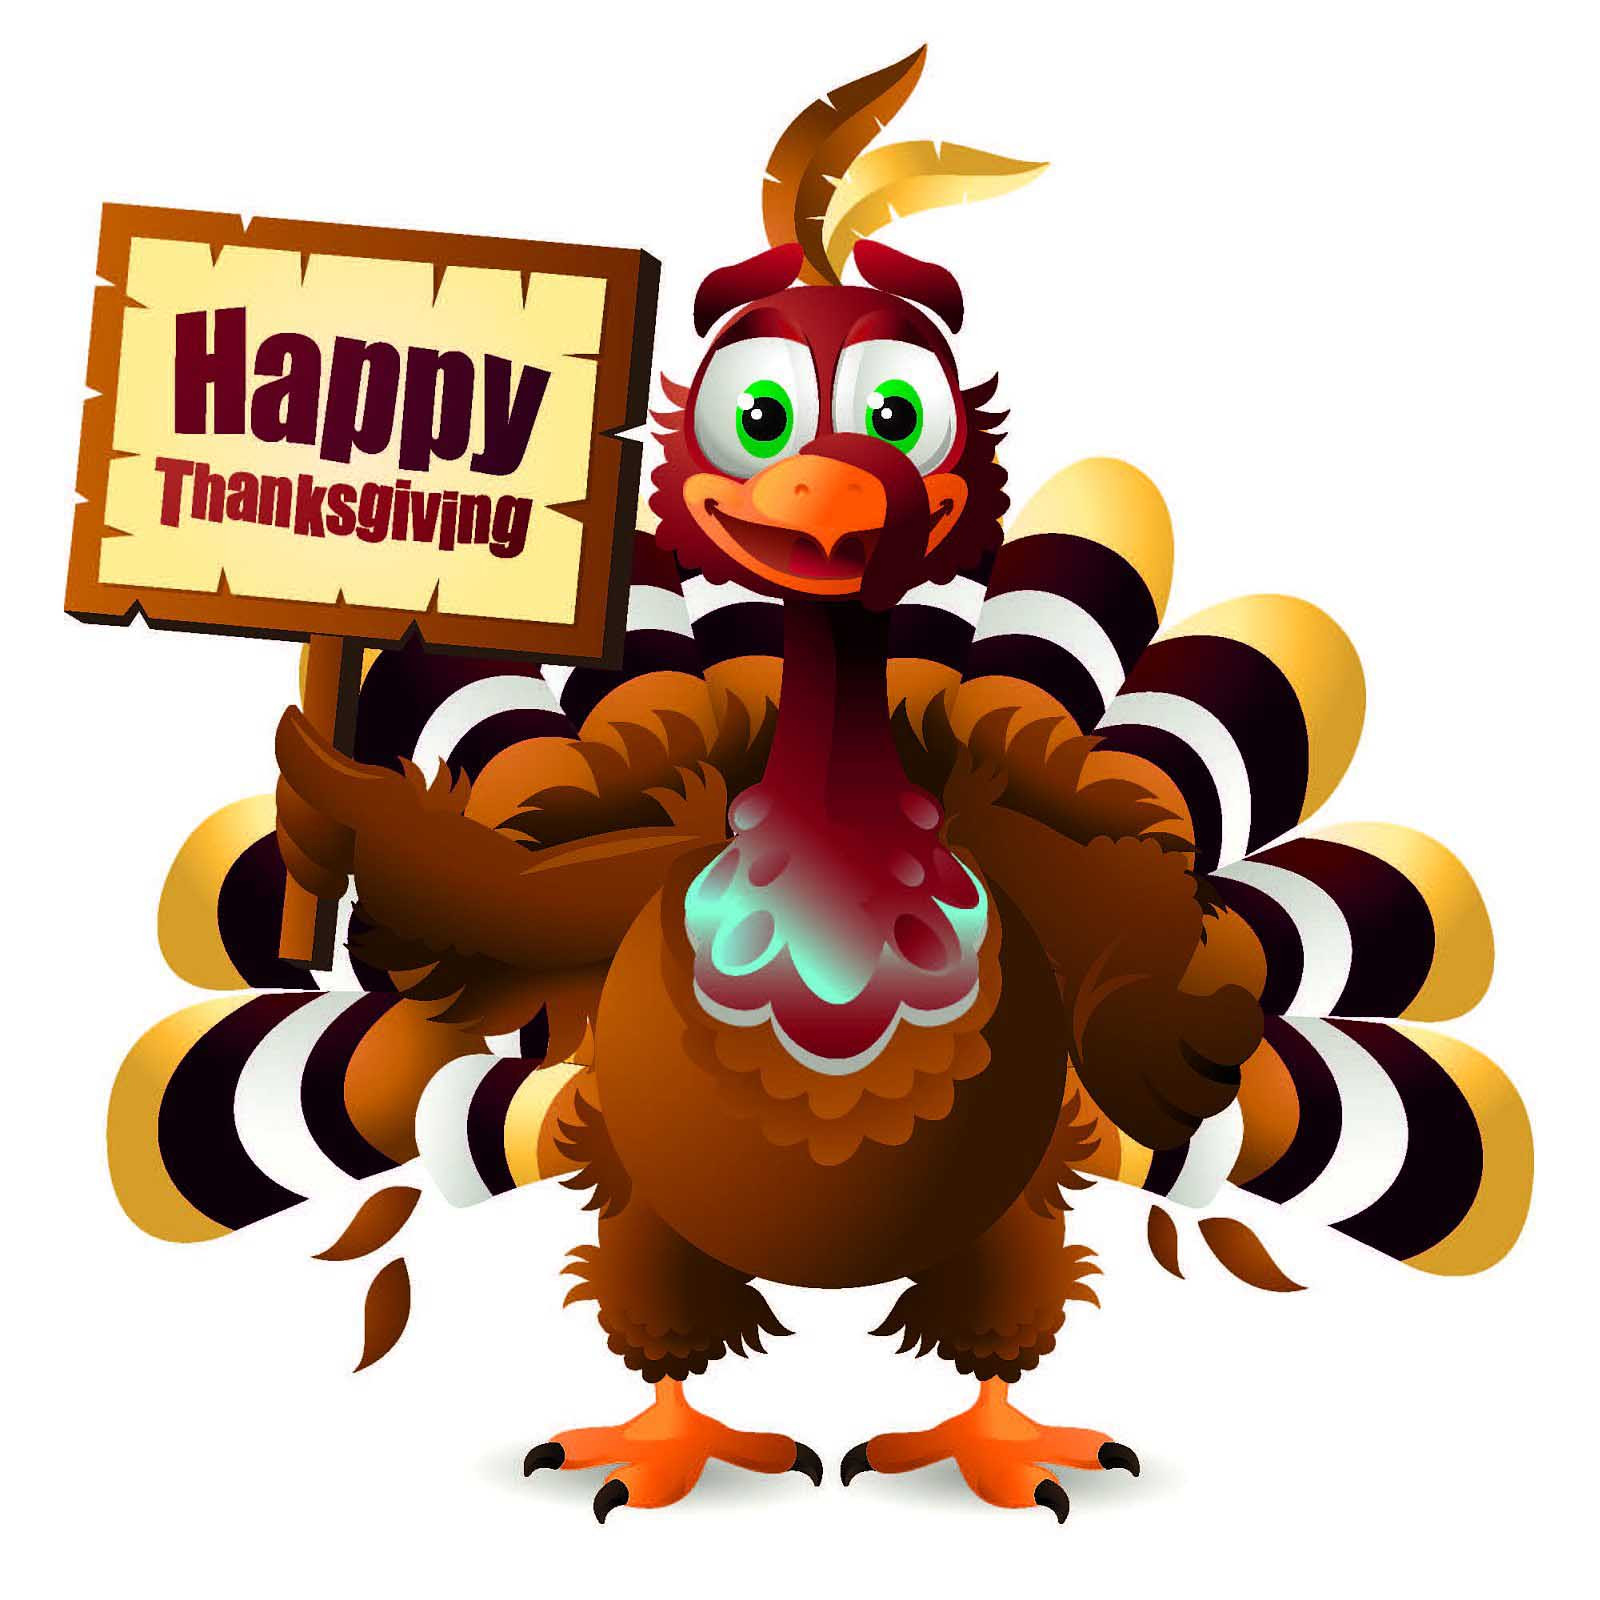 Thanksgiving Turkey Graphic
 2016 Thanksgiving Charlie Brown Wallpapers & Clipart s